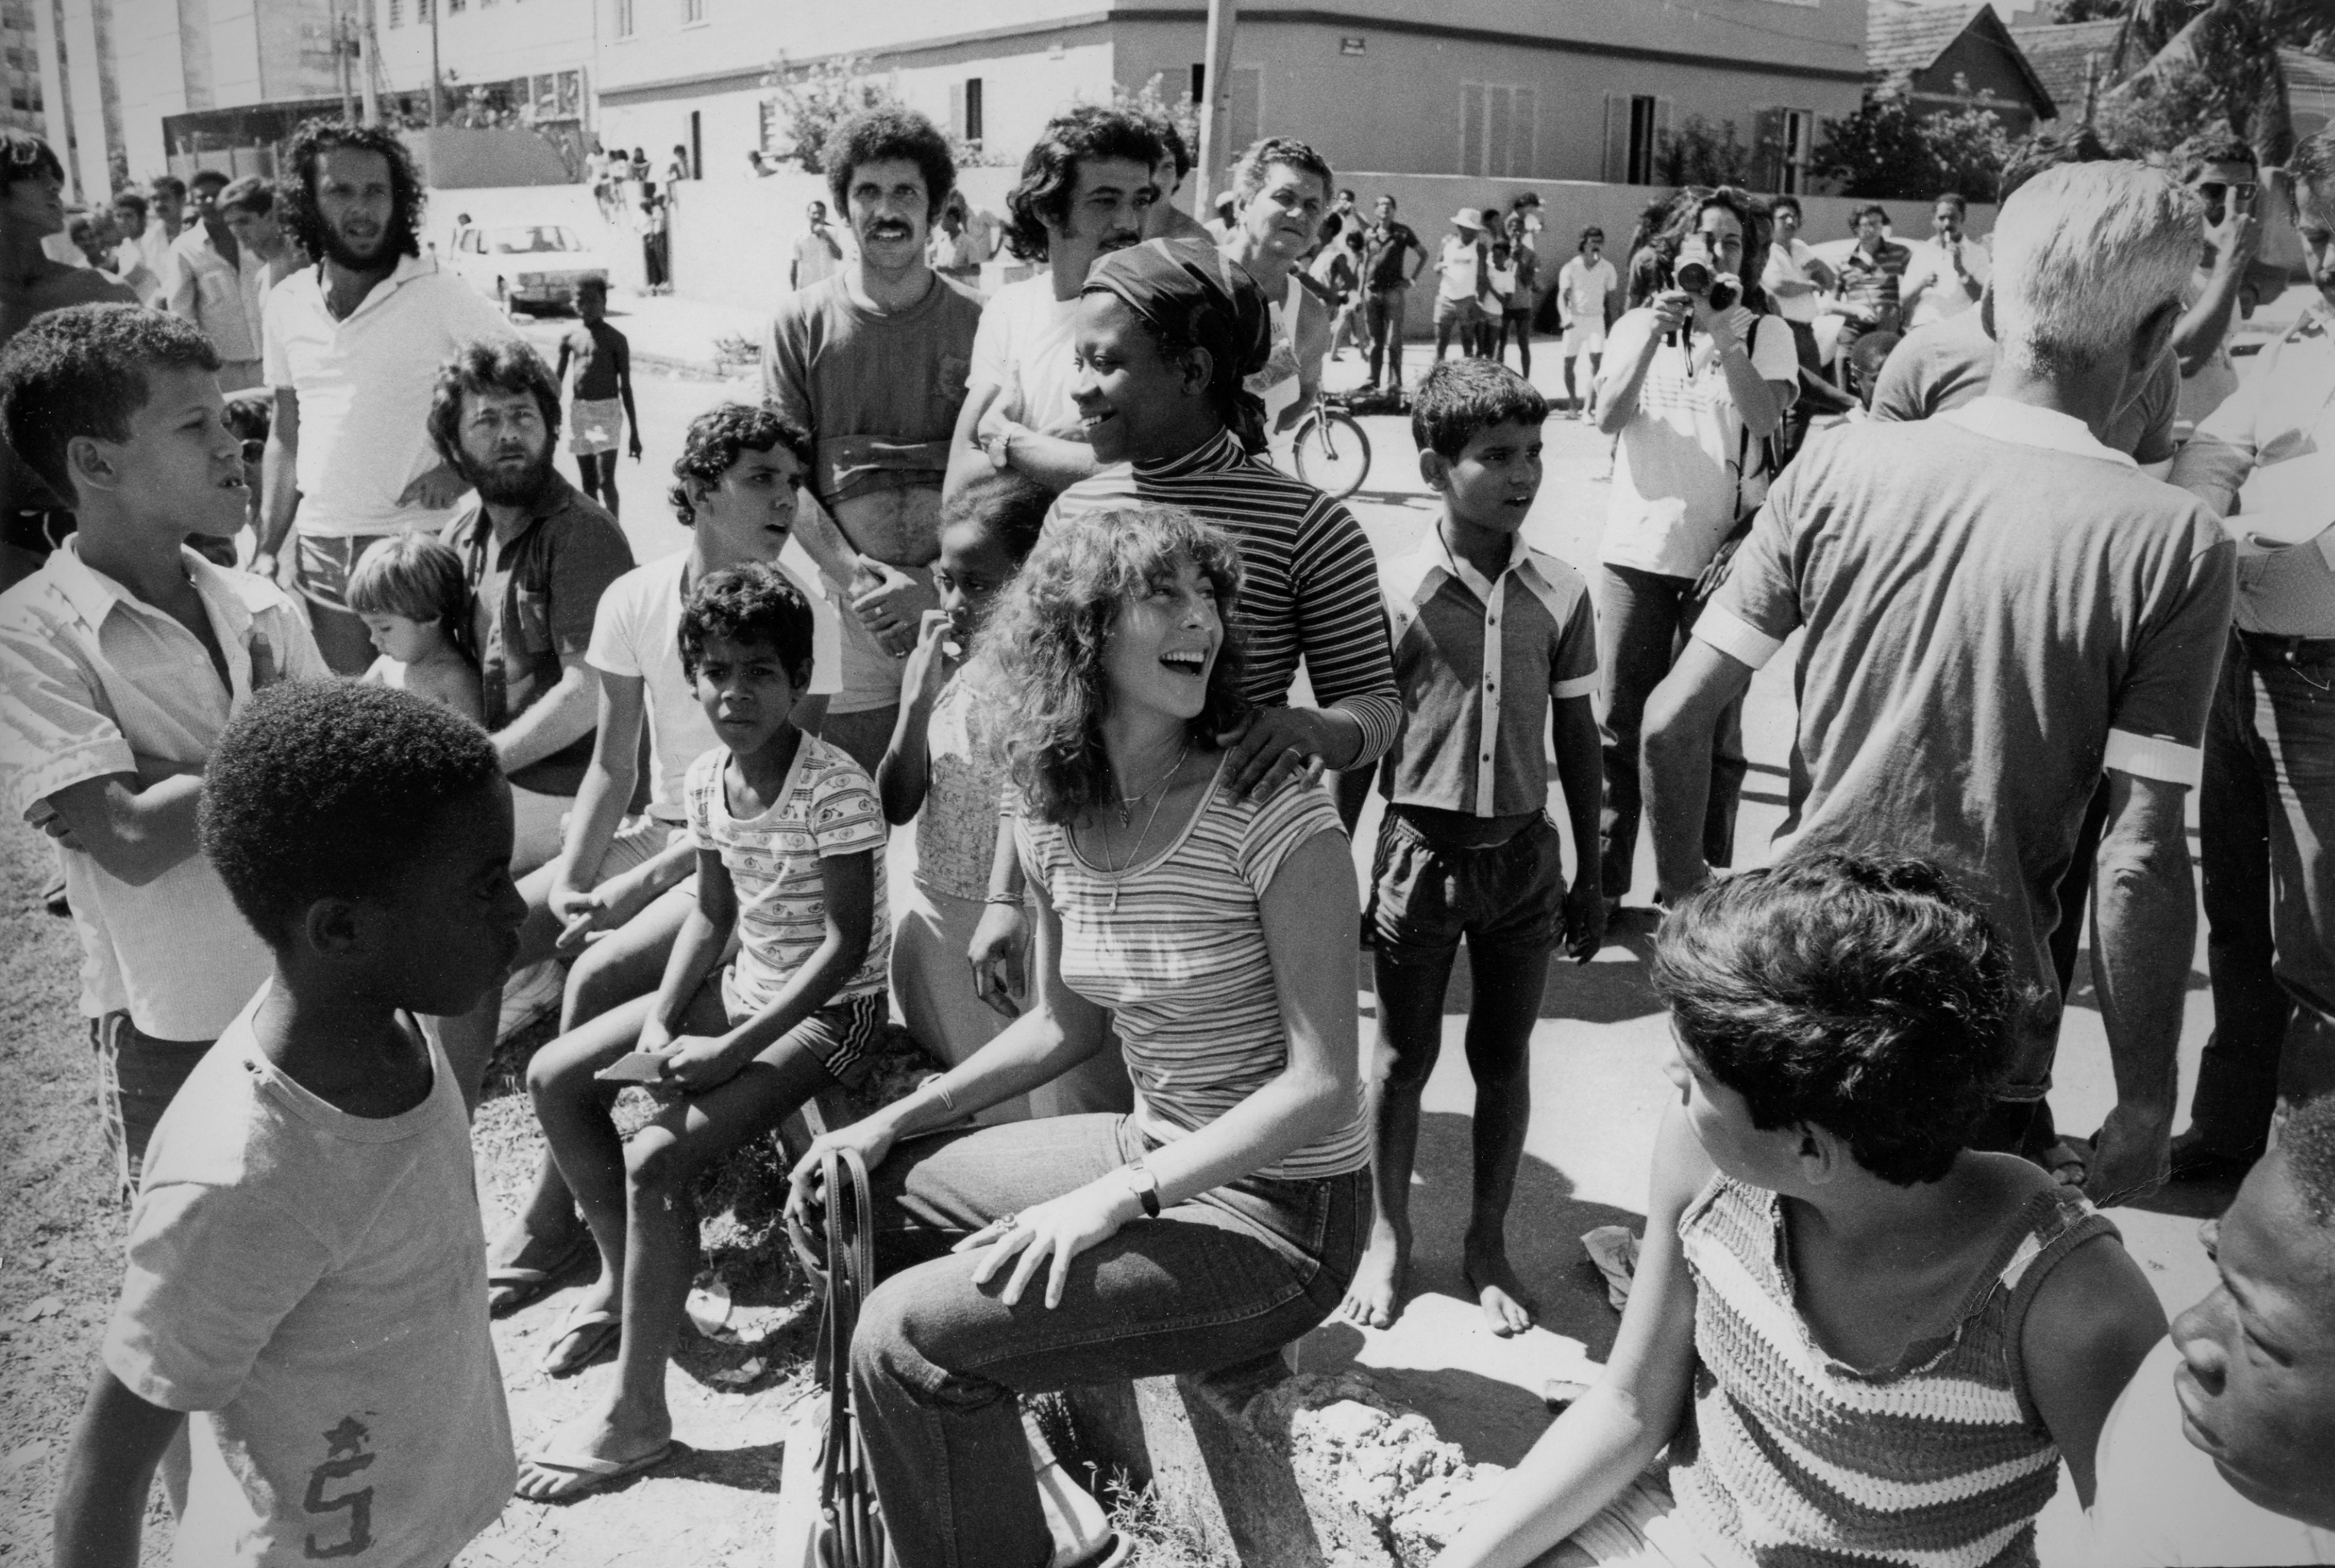 Janice Perlman (seated at center), in 1973, with residents of Rio de Janeiro’s Conjunto de Quitungo Housing Project.